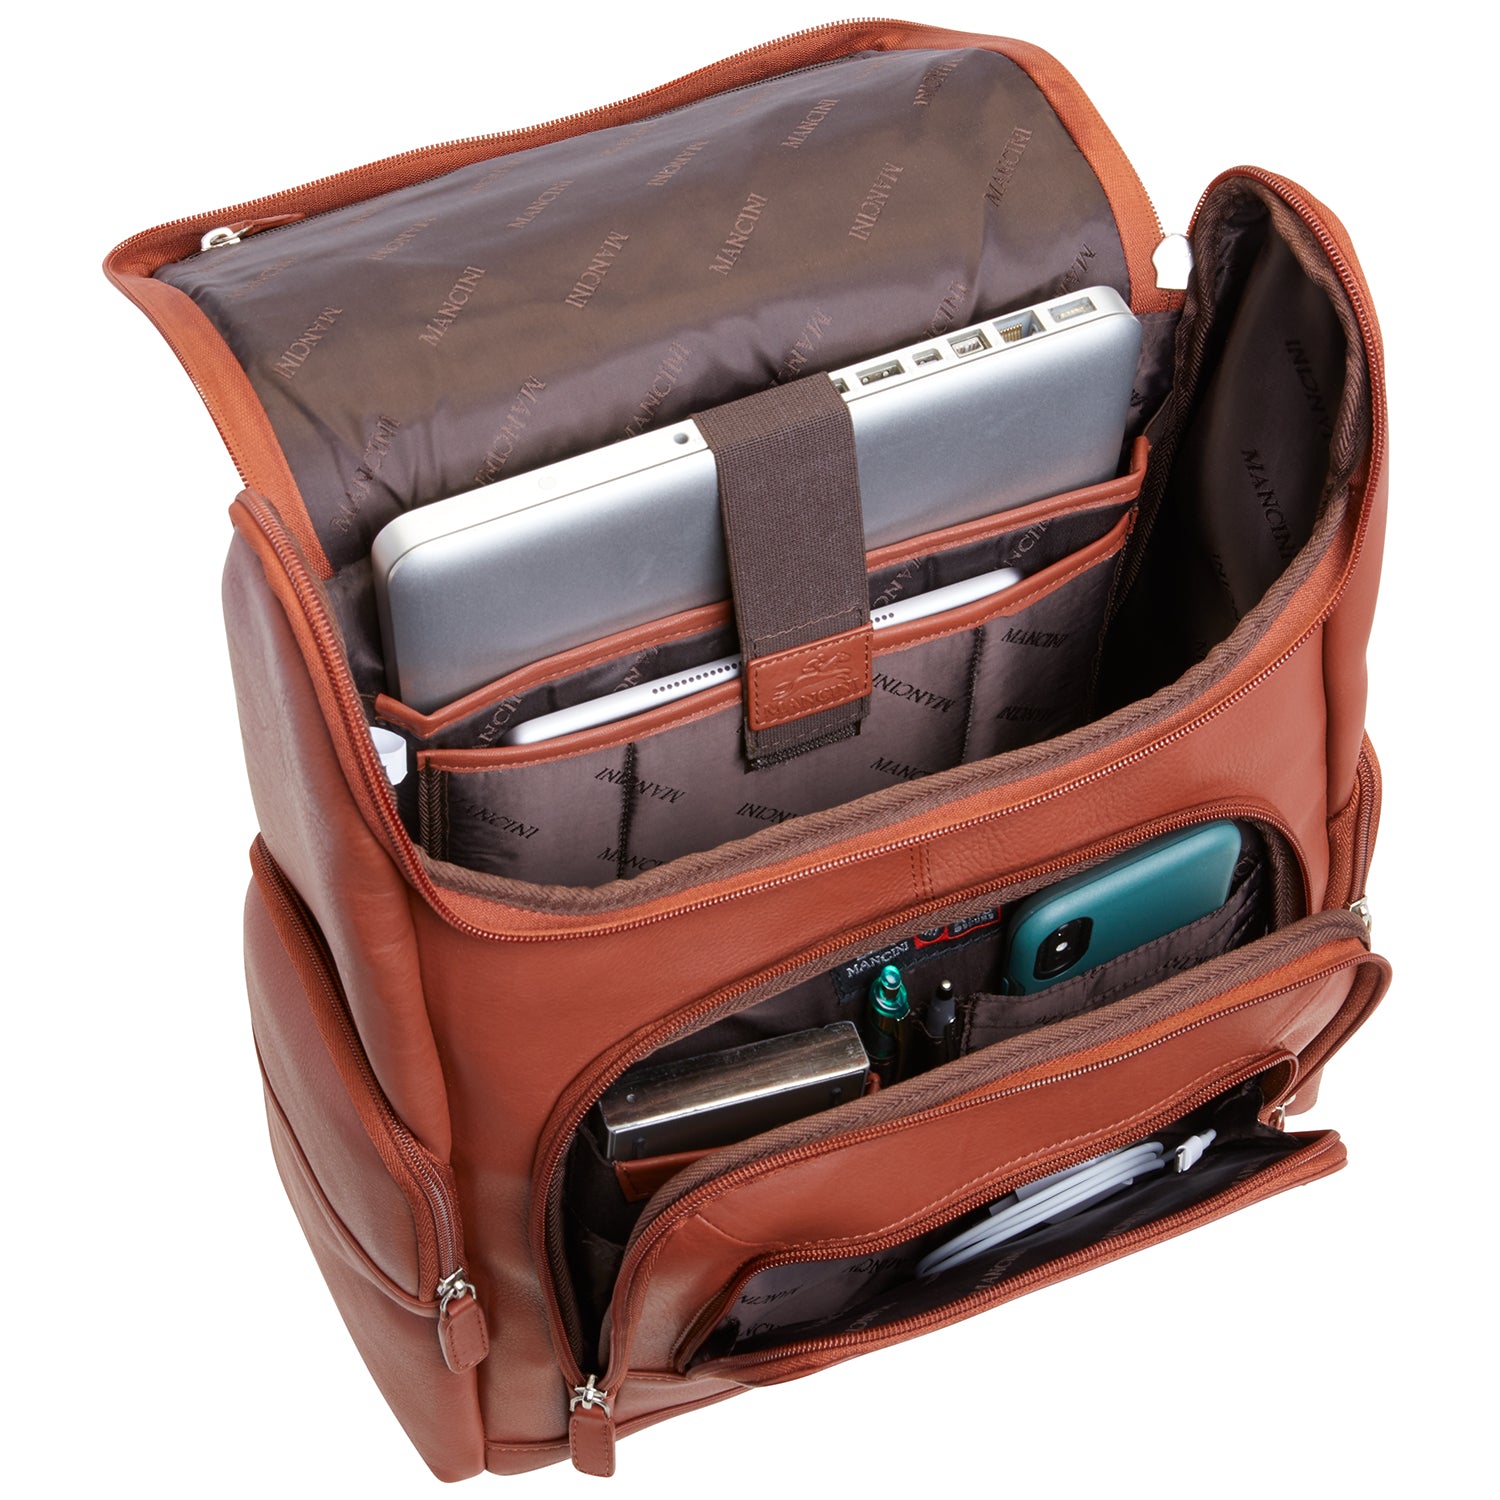 Mancini Leather Backpack with RFID Secure pocket for 15.6" Laptop and Tablet, 12" x 6" x 15", Cognac